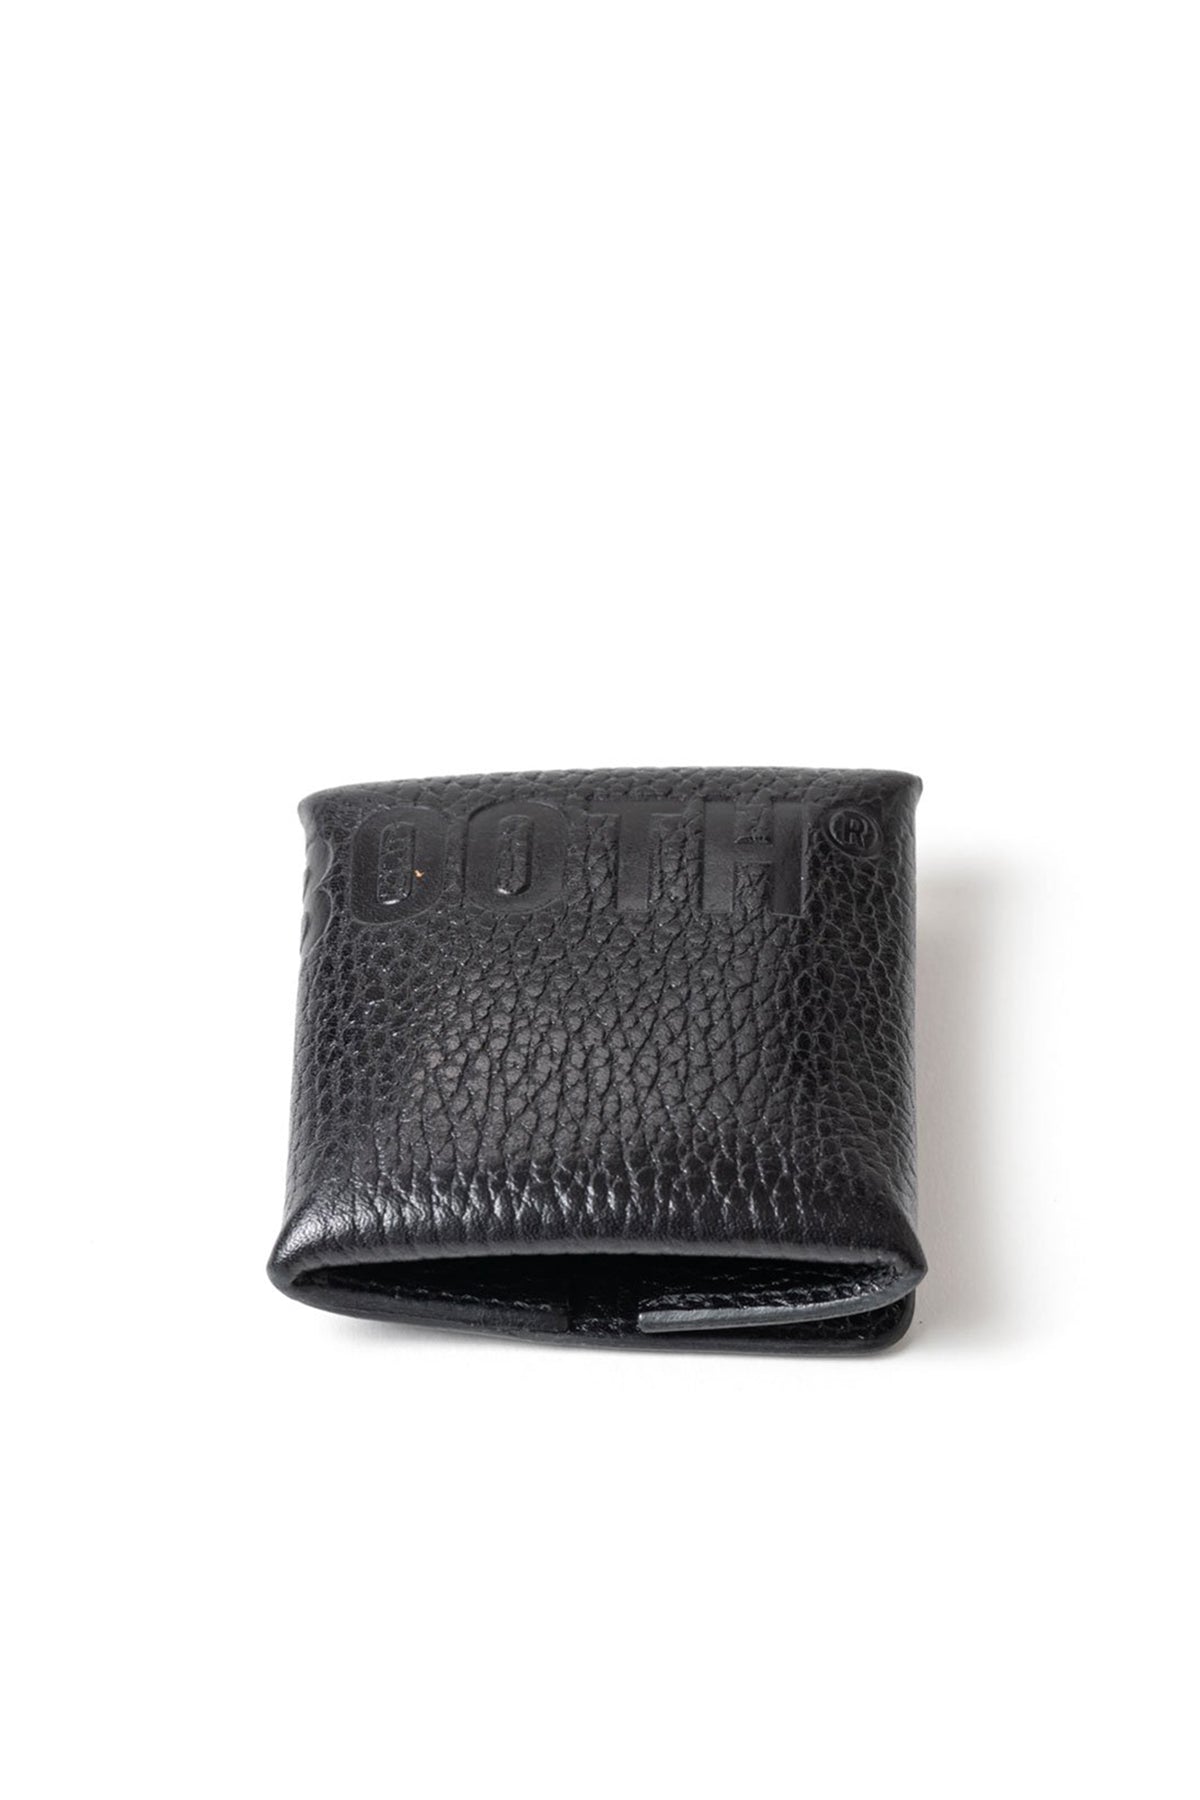 LEATHER COIN CASE / BLK